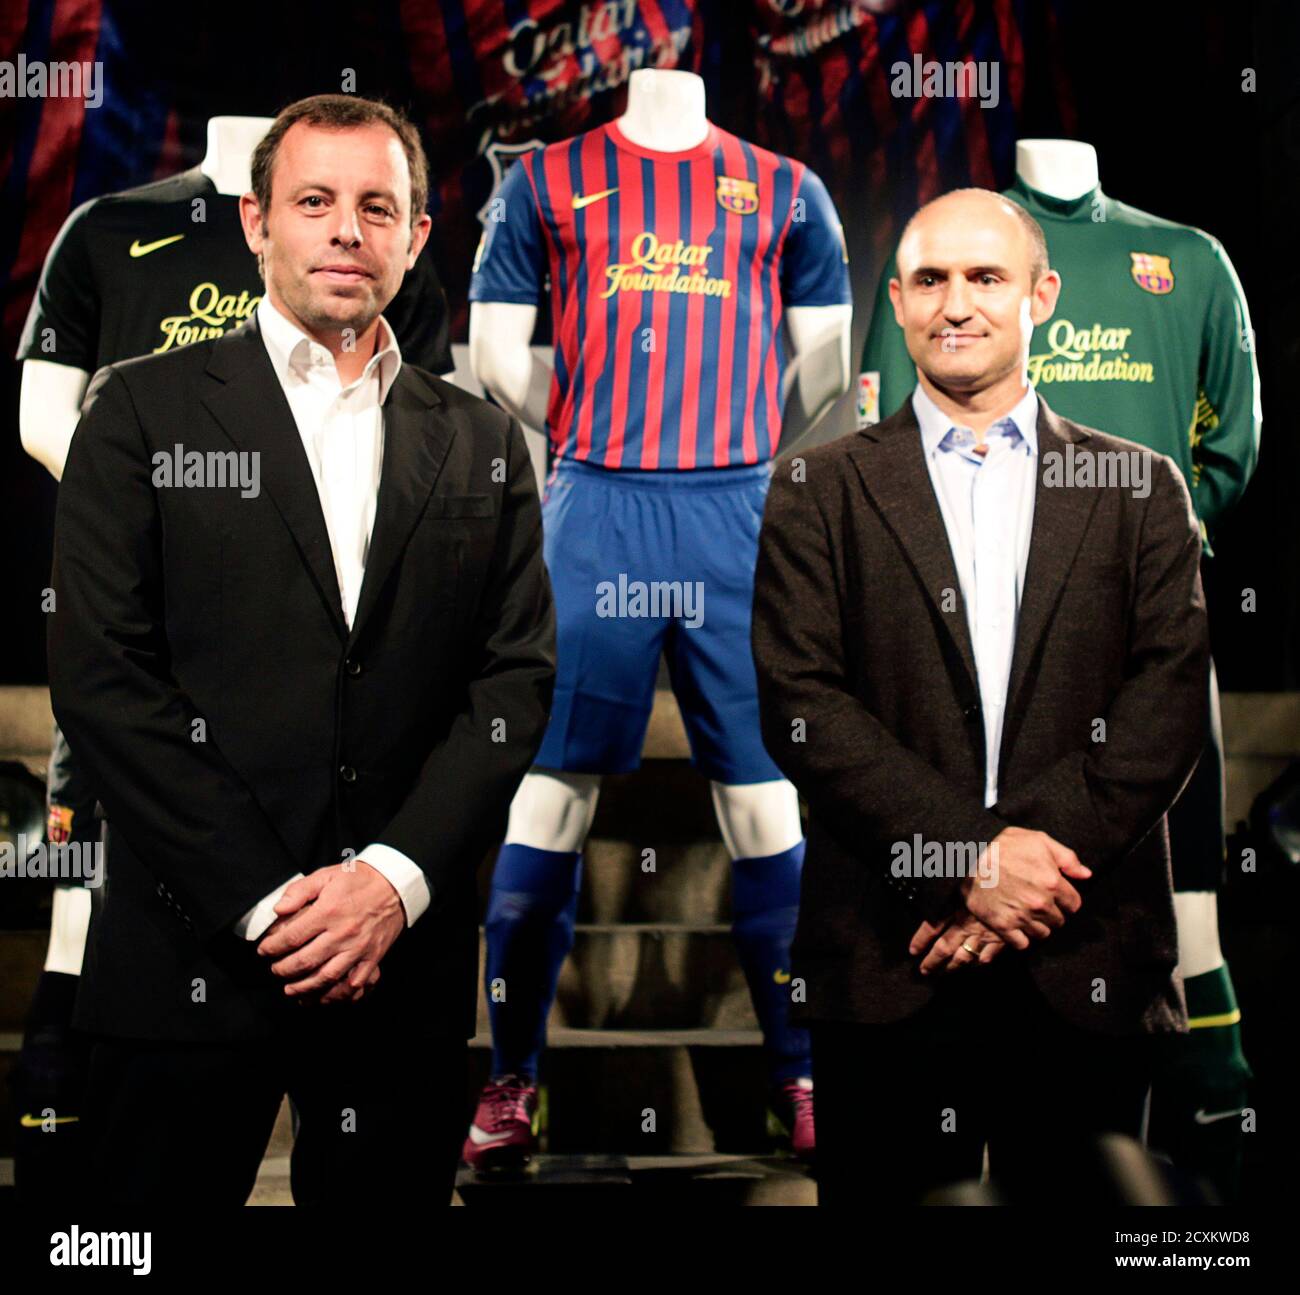 Barcelona's President Sandro Rosell (L) and Nike's Iberia President Marcos pose with the new Barcelona jerseys for the 2011-2012 season with the Qatar Foundation logo during a presentation at Camp Nou